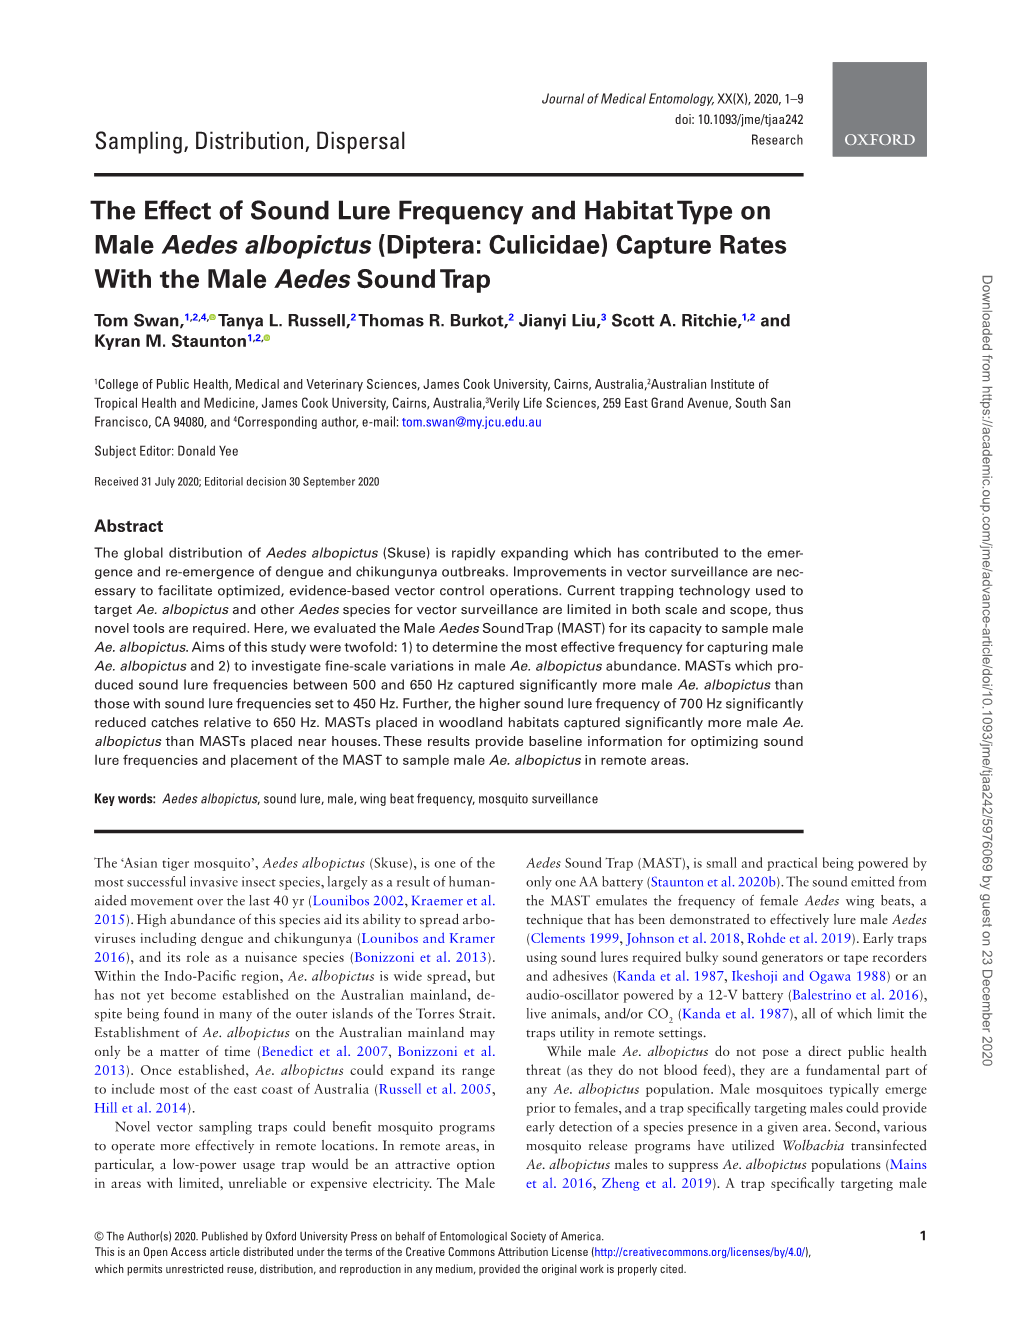 The Effect of Sound Lure Frequency And